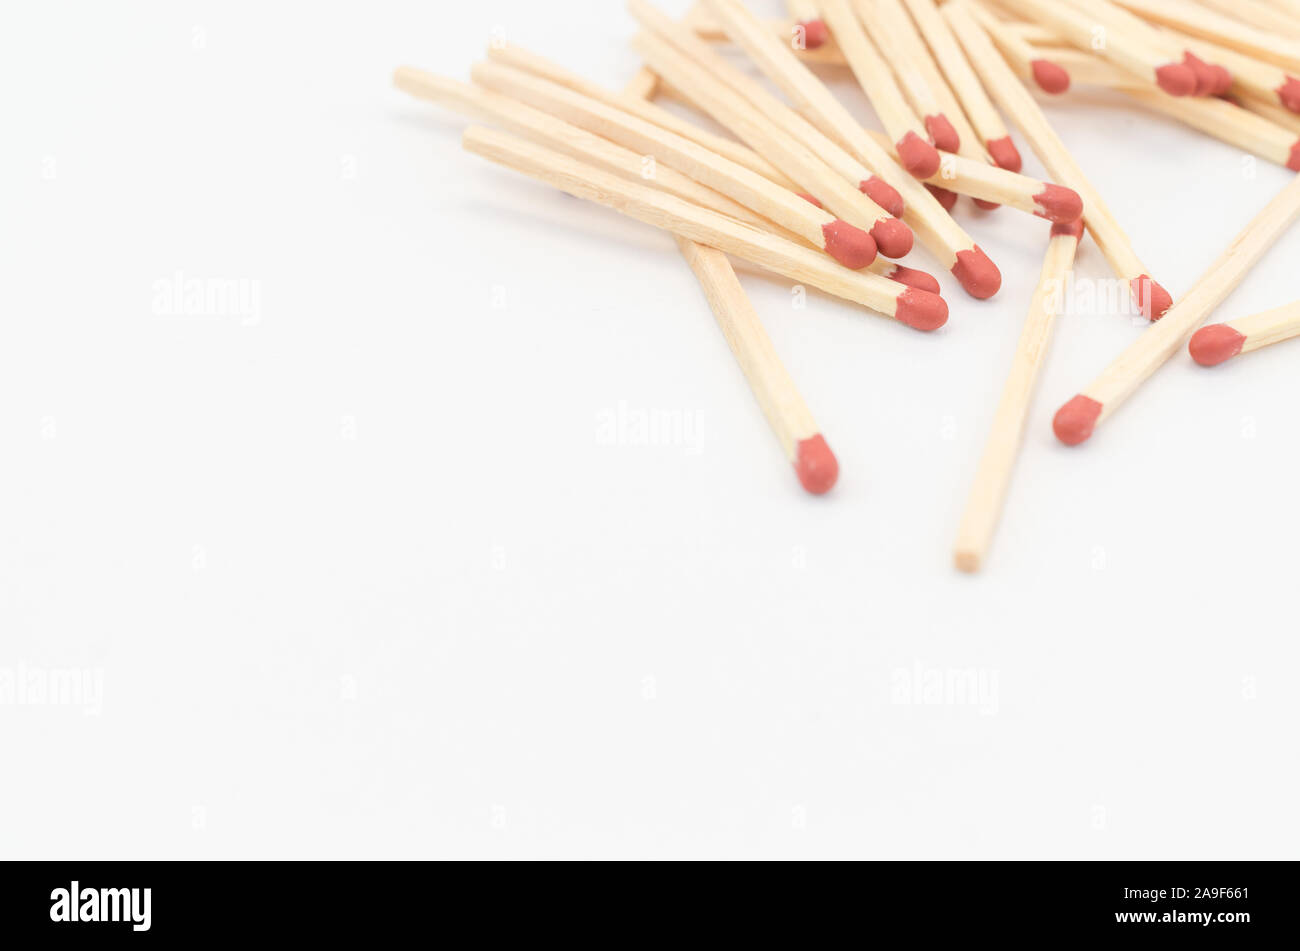 bunch of matches on a white surface Stock Photo